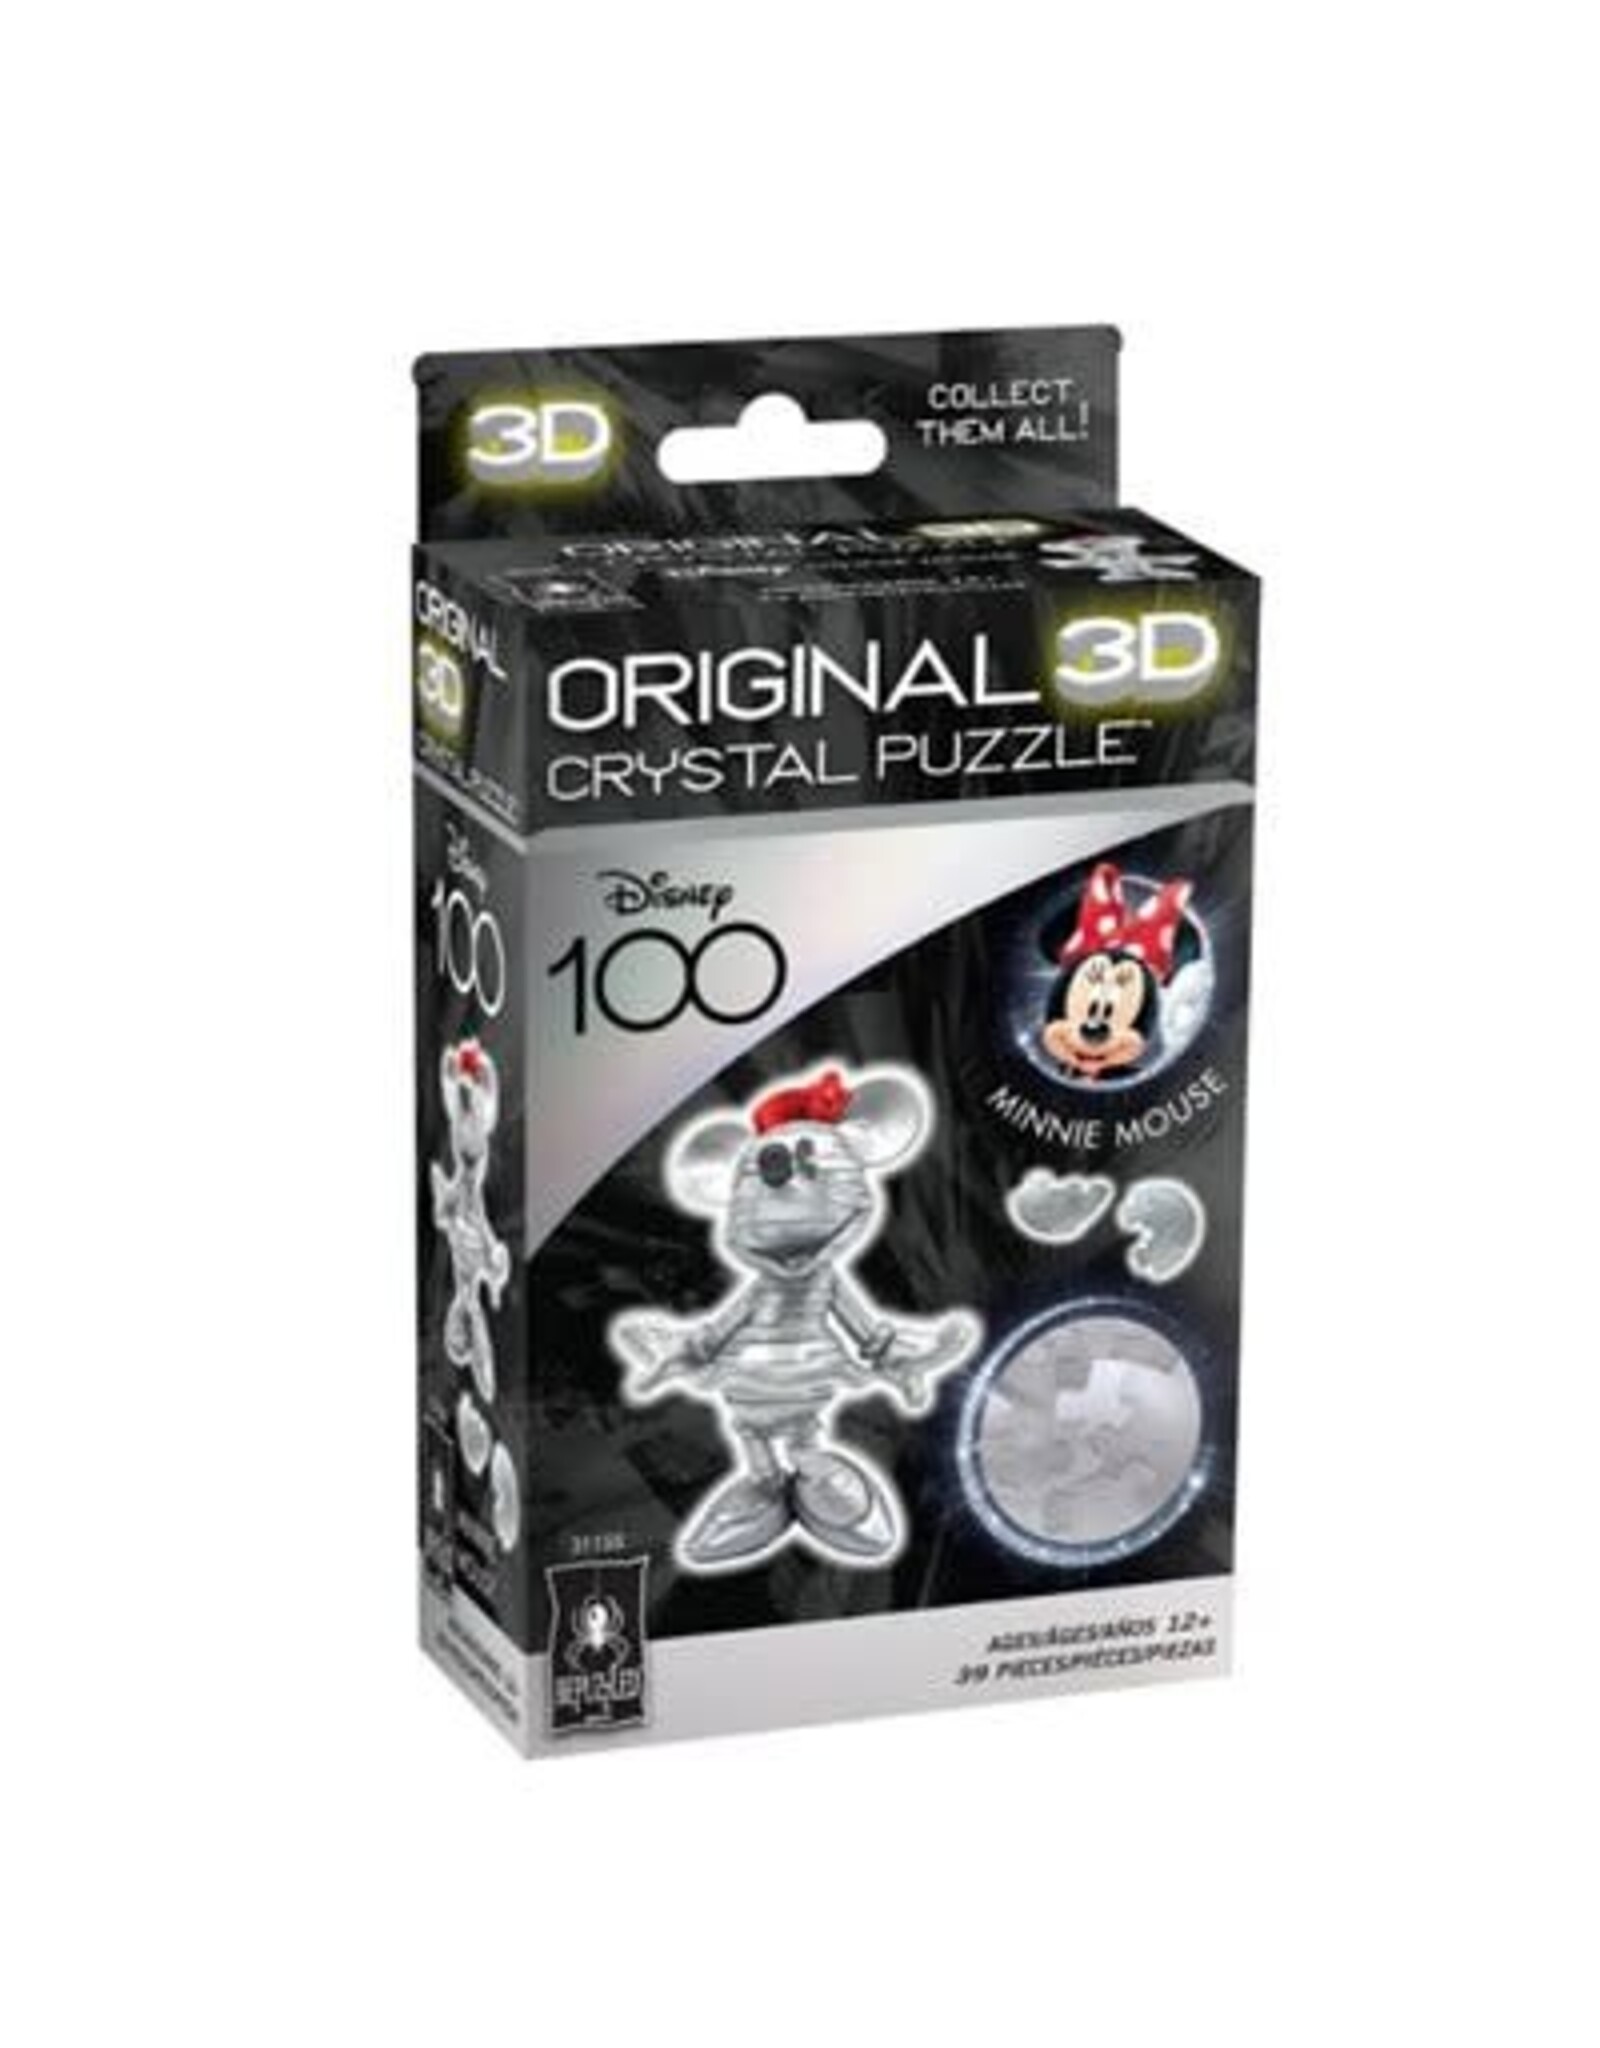 Crystal Puzzle: Disney 100 Minnie Mouse